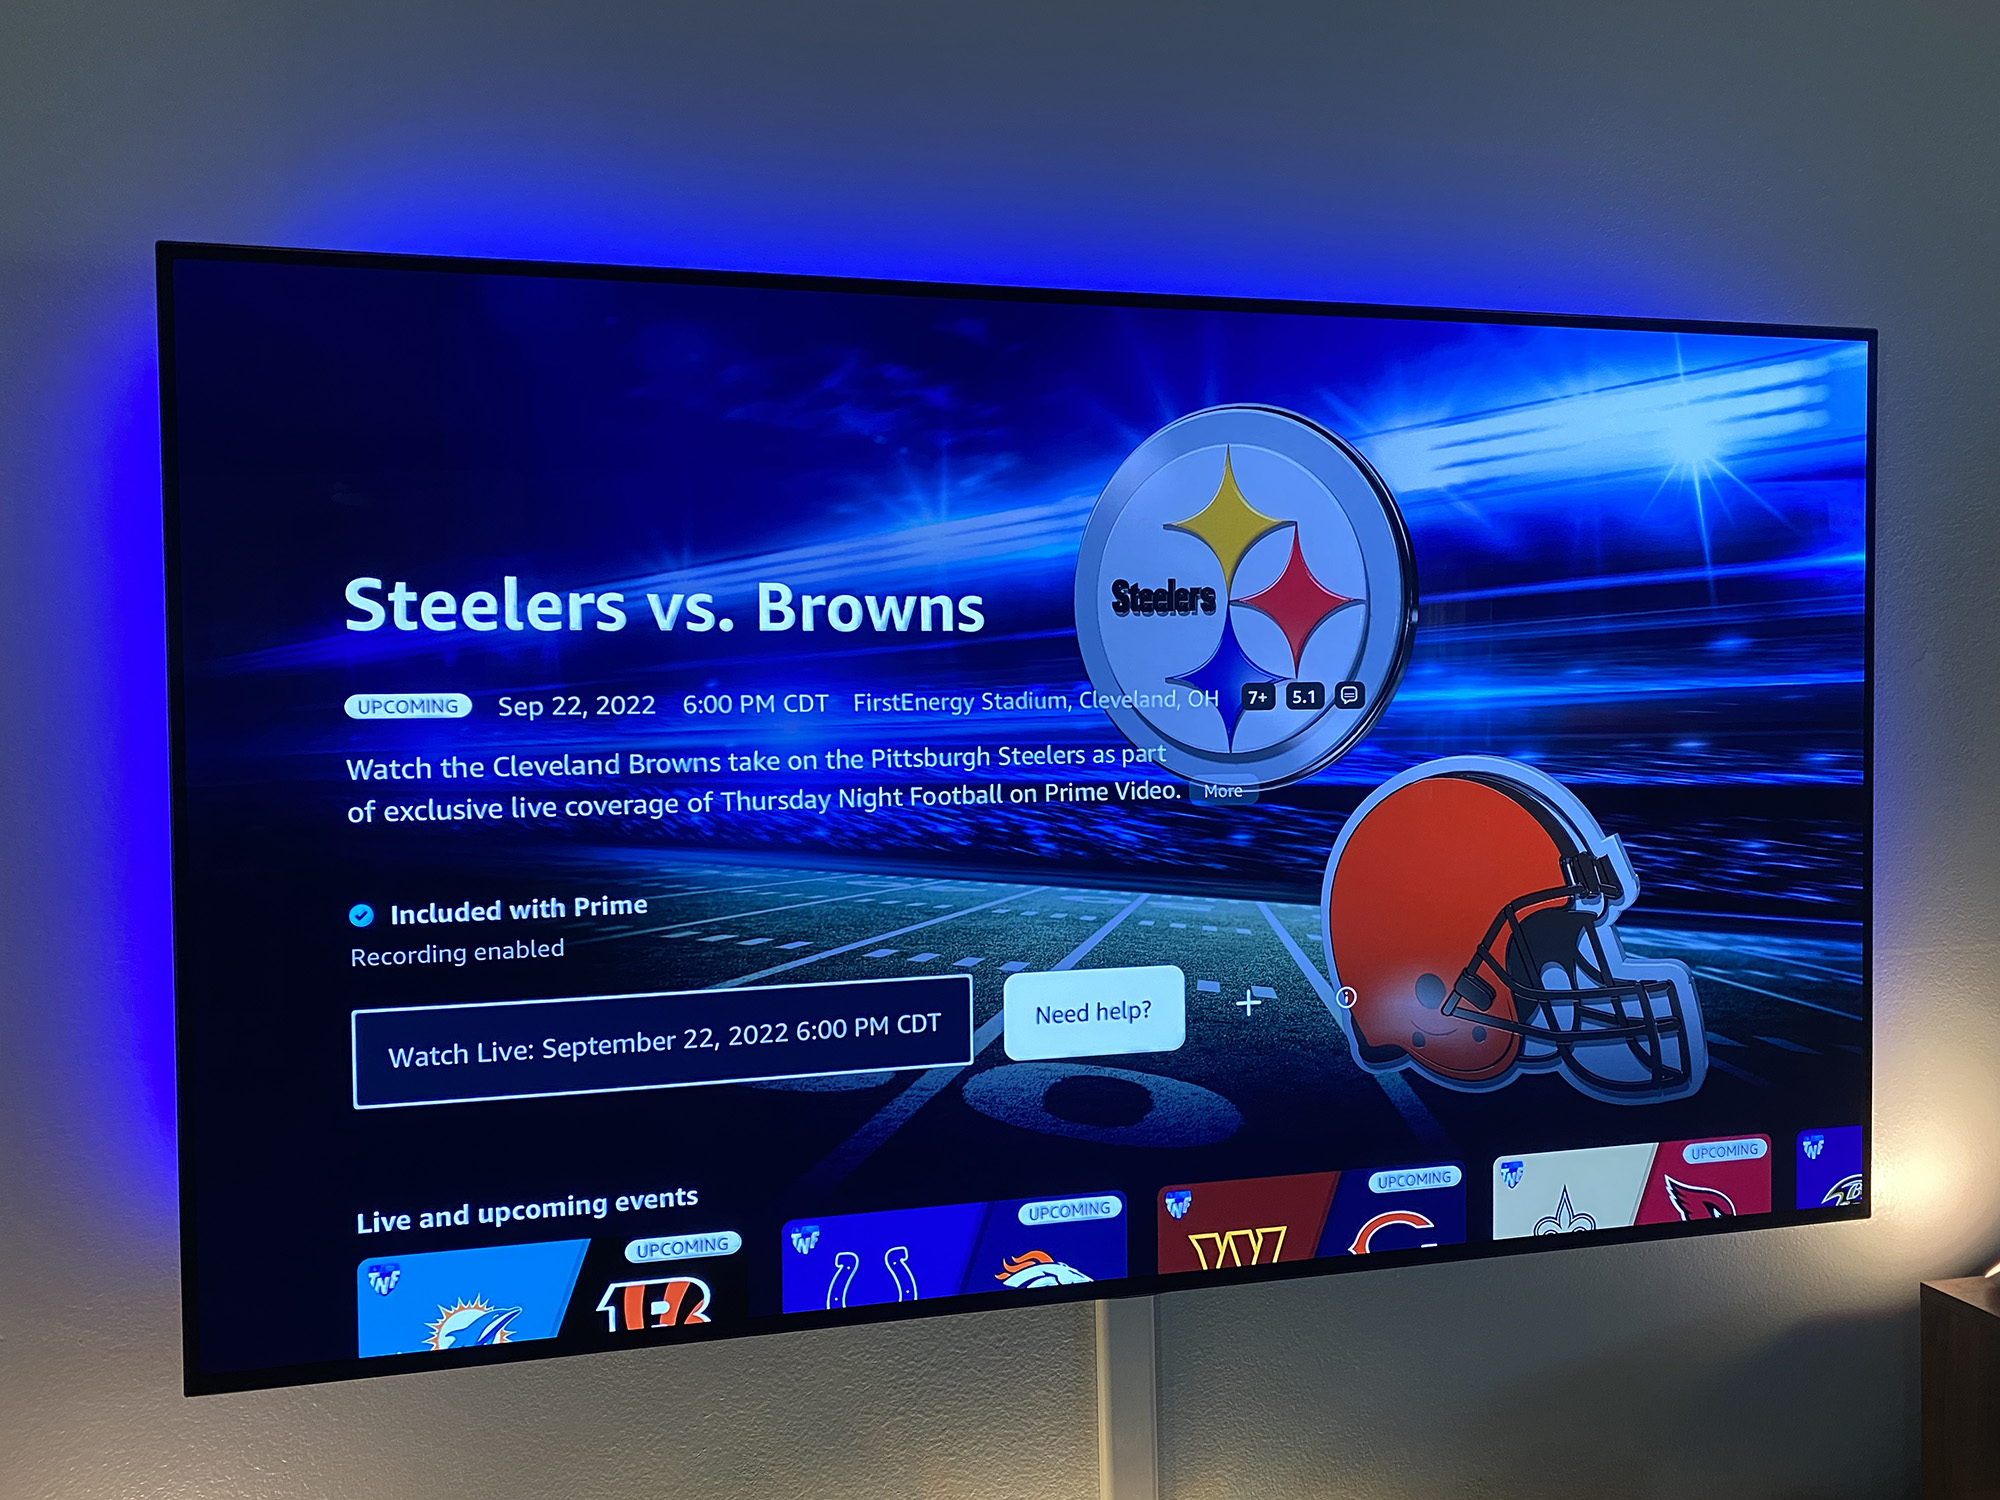 Watch Pittsburgh Steelers vs. Cleveland Browns on Thursday Night